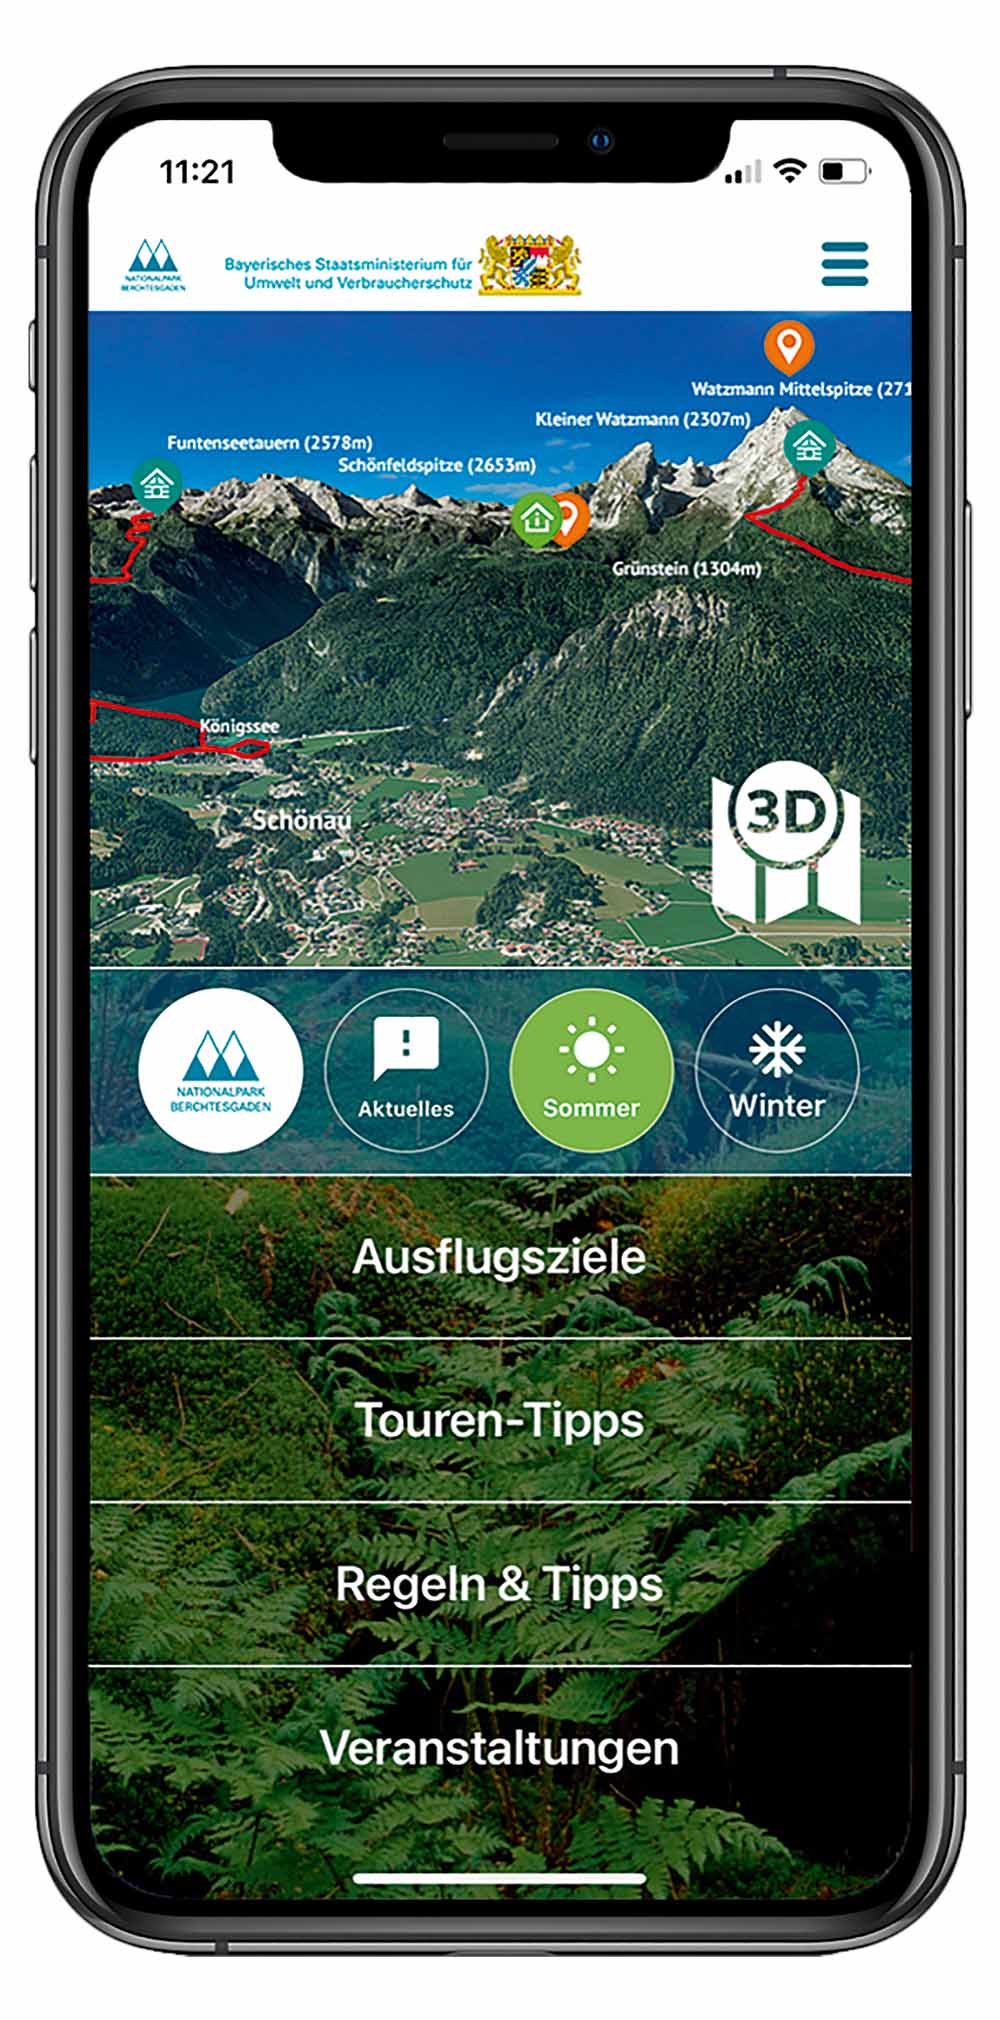 The app Berchtesgaden National Park with 3D maps - only in German